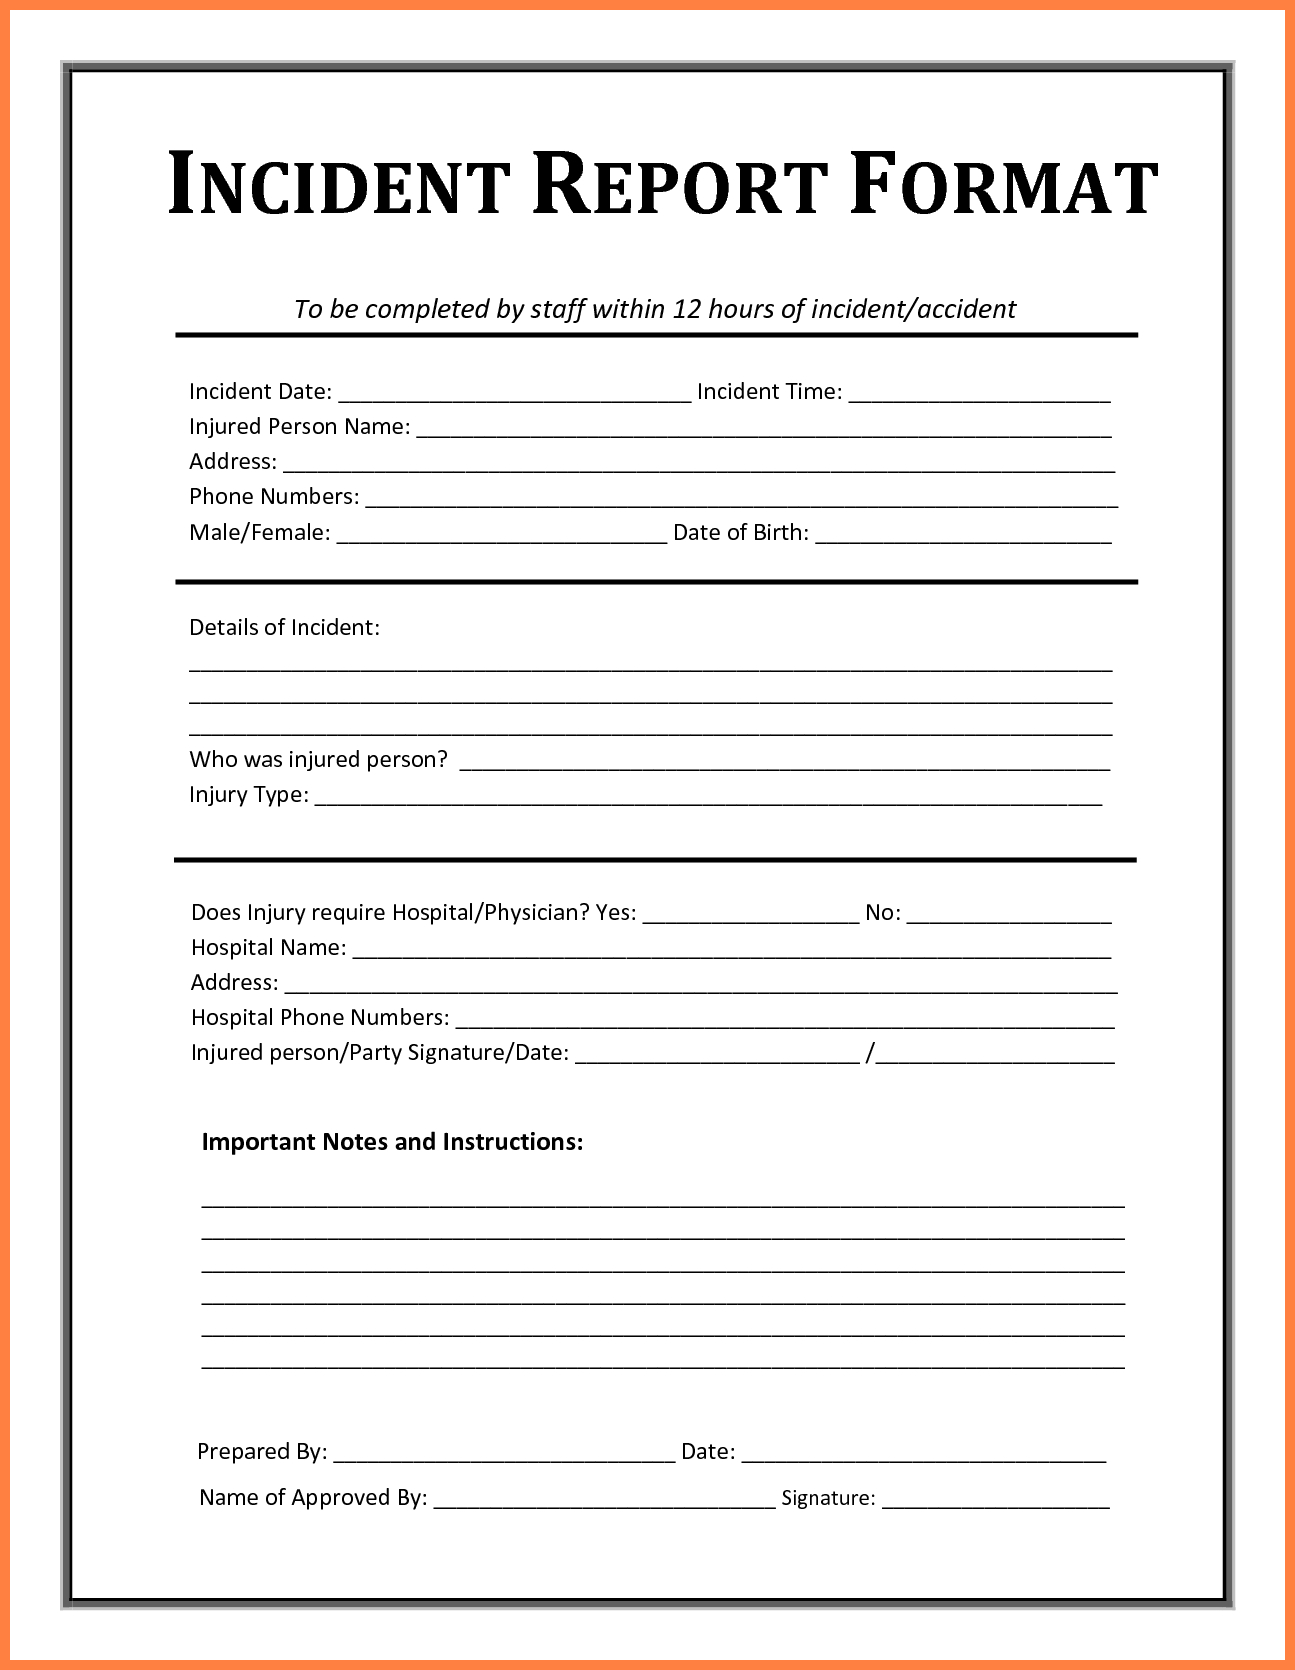 Incident Report Form Template Microsoft Excel #daycareforms #daycare - Free Printable Incident Report Form